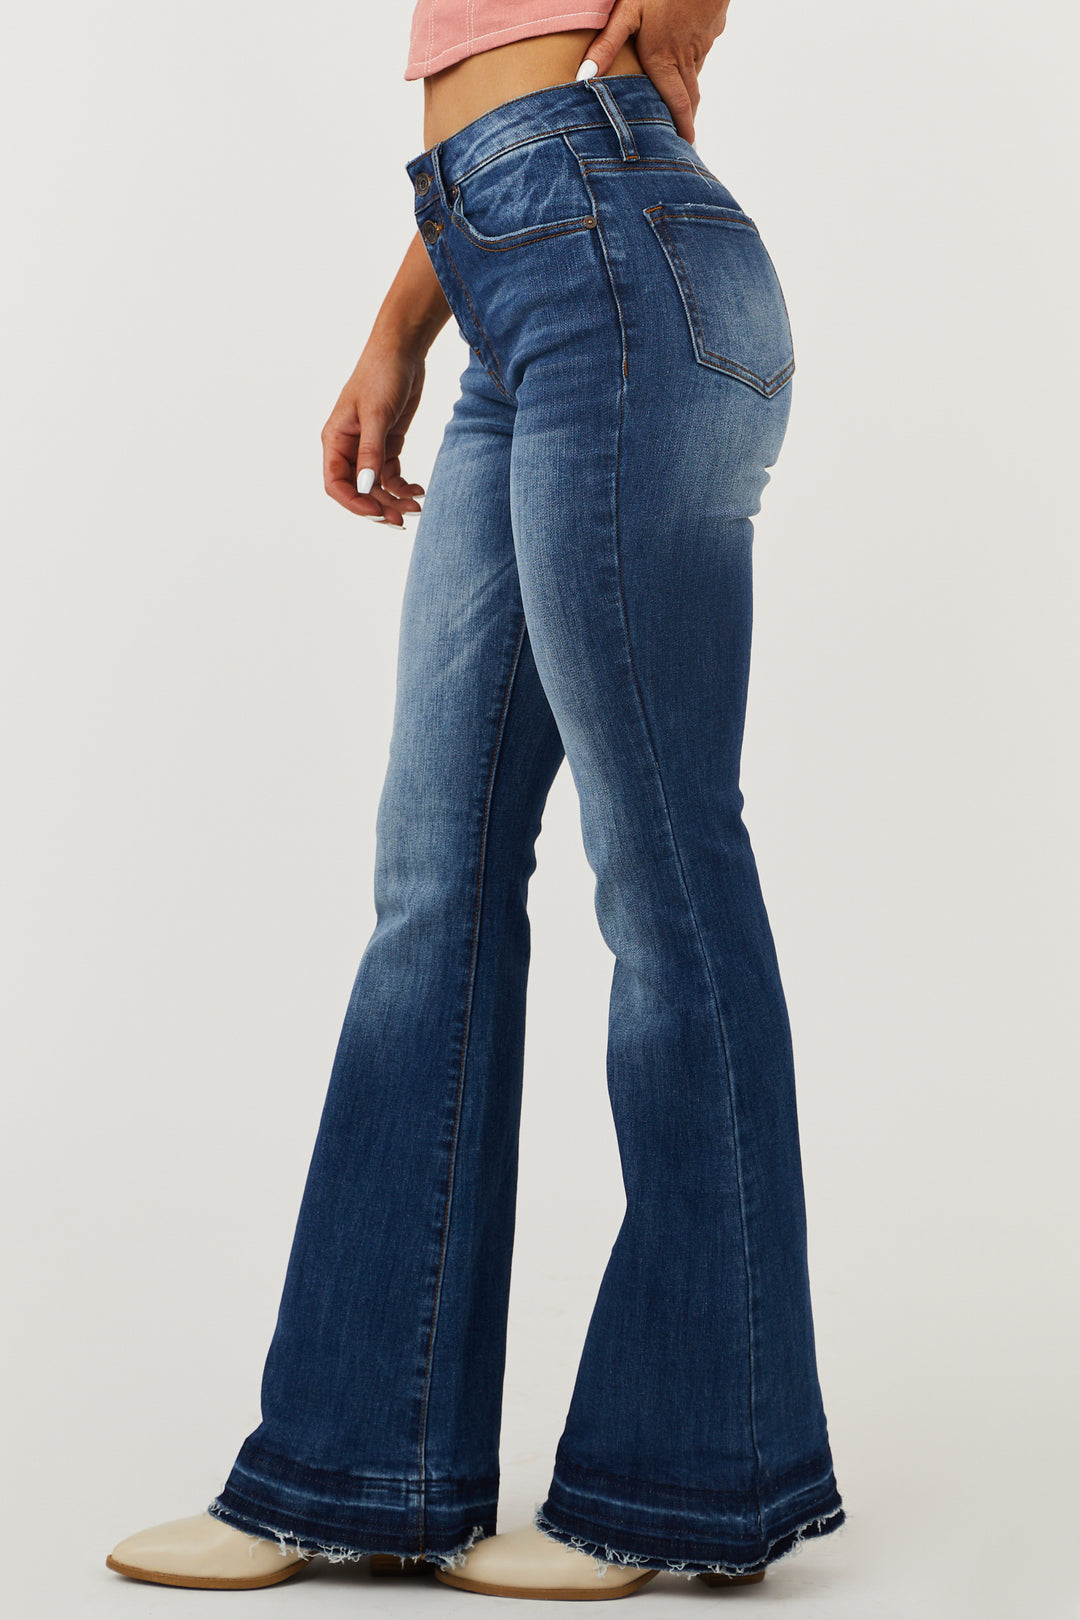 Special A Dark Wash High Rise Tiered Hem Bootcut Jeans & Lime Lush